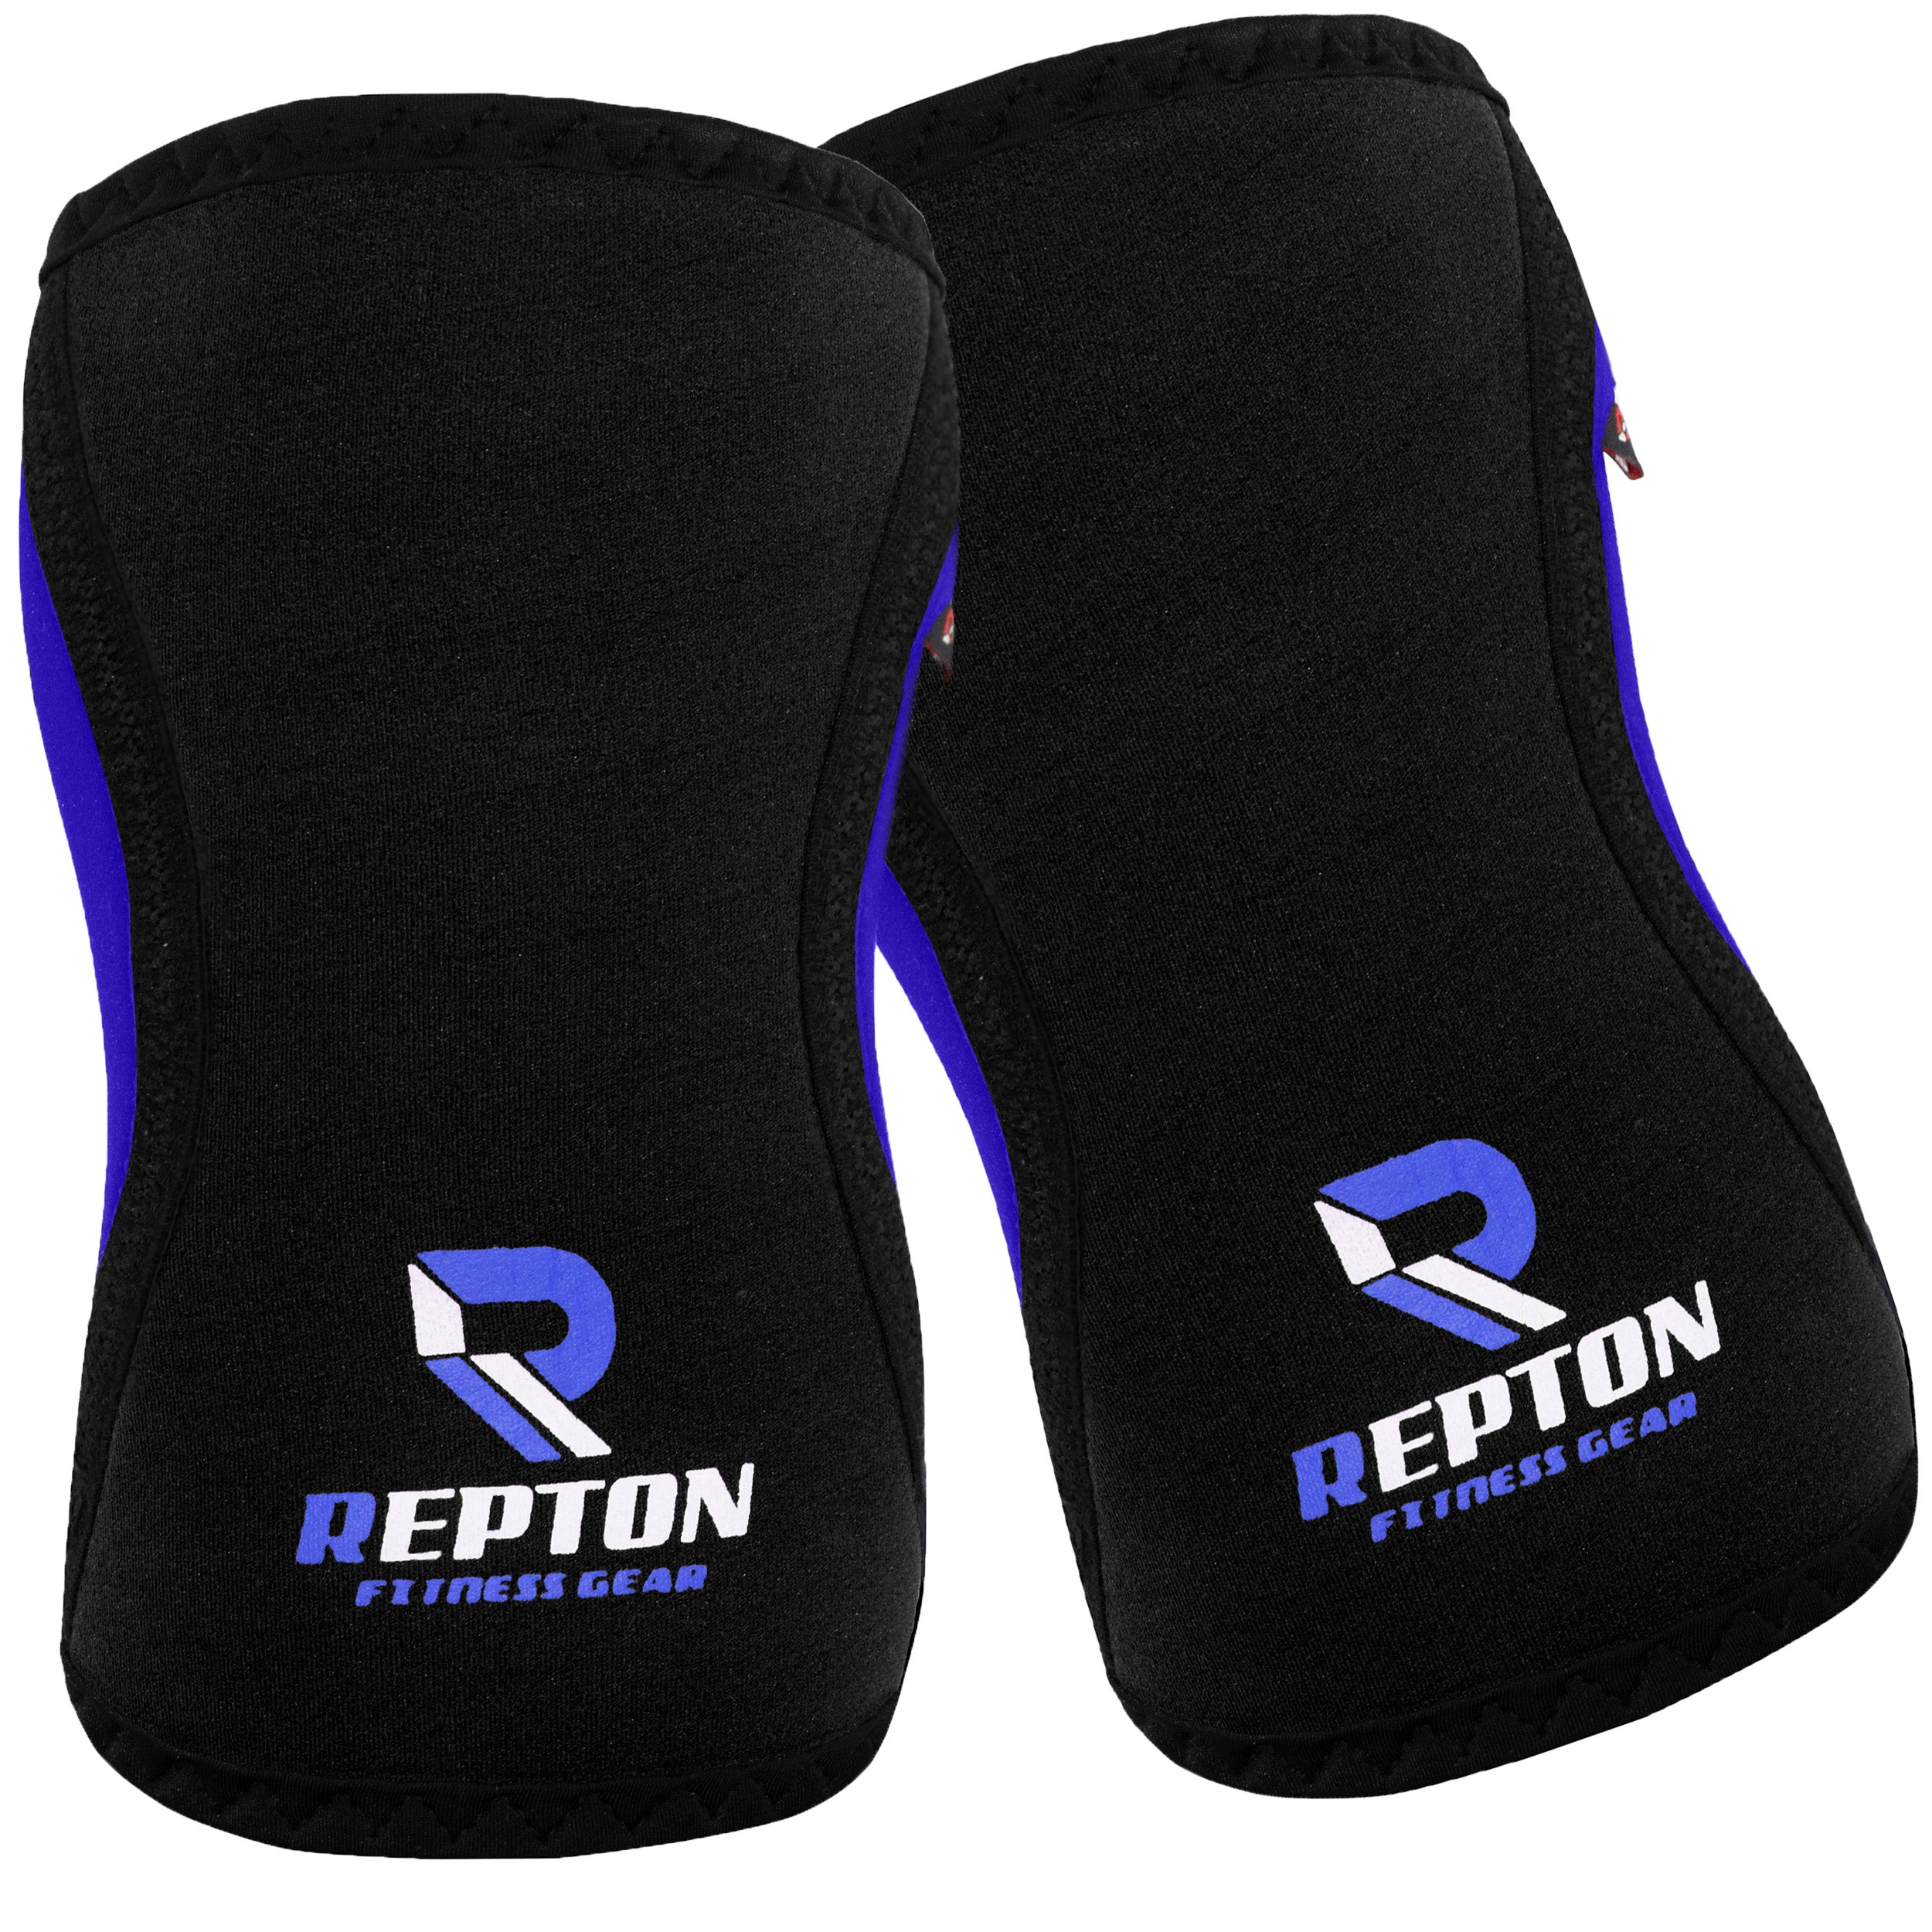 Knee Sleeve Pair Power Lifting Patella Support Brace Knee Protector Repton Fitness Gear